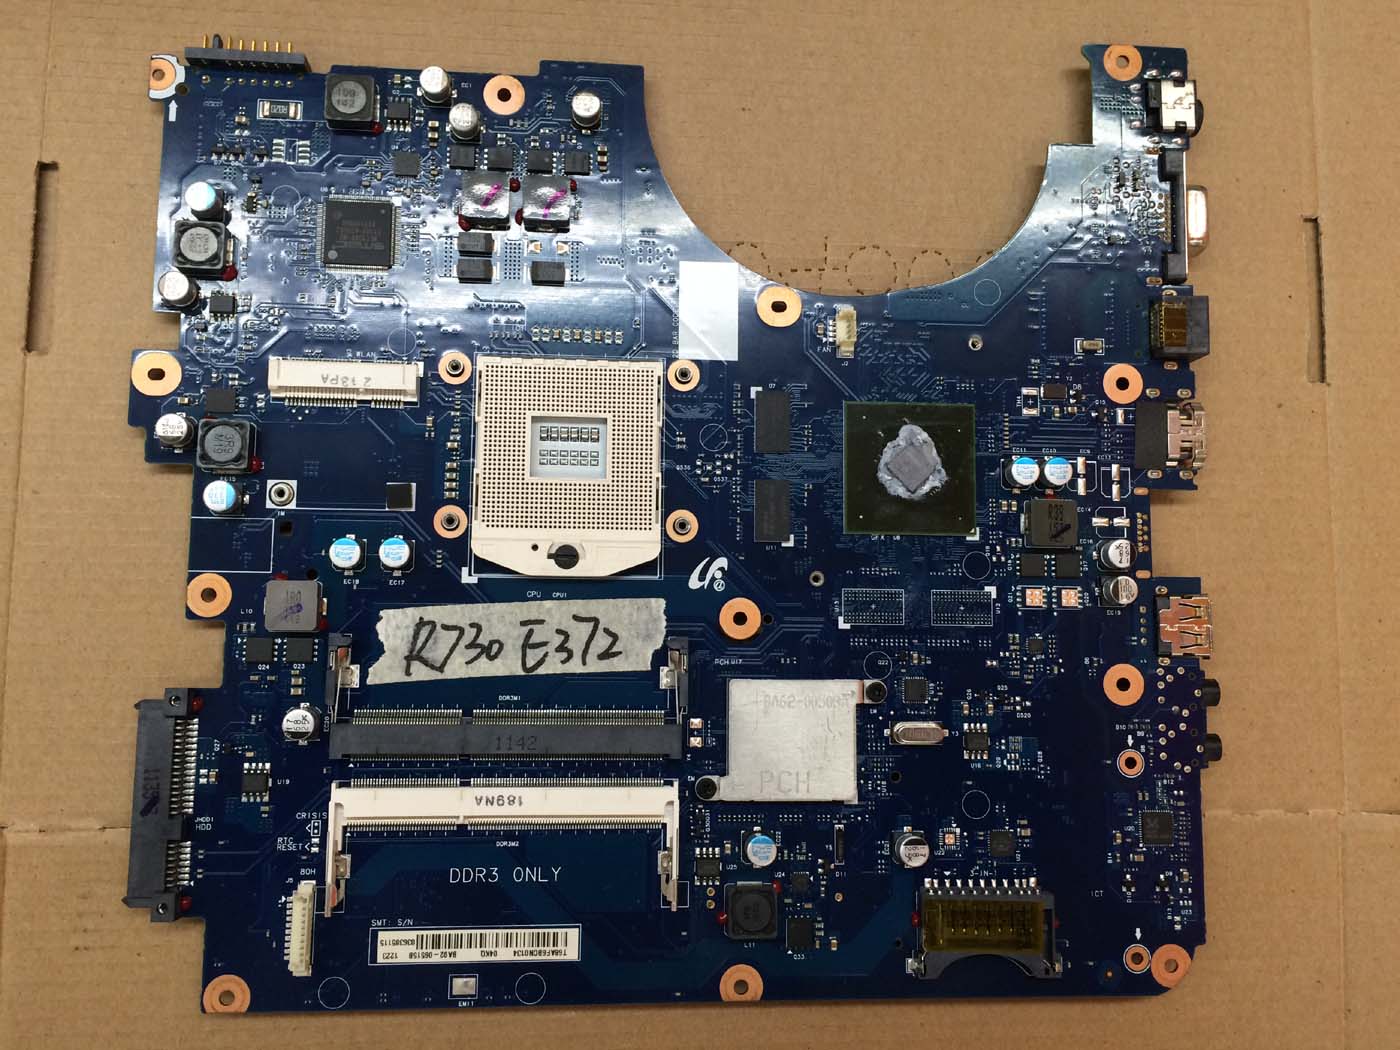 Samsung R530 motherboard BREMEN-L3 with 4 video card